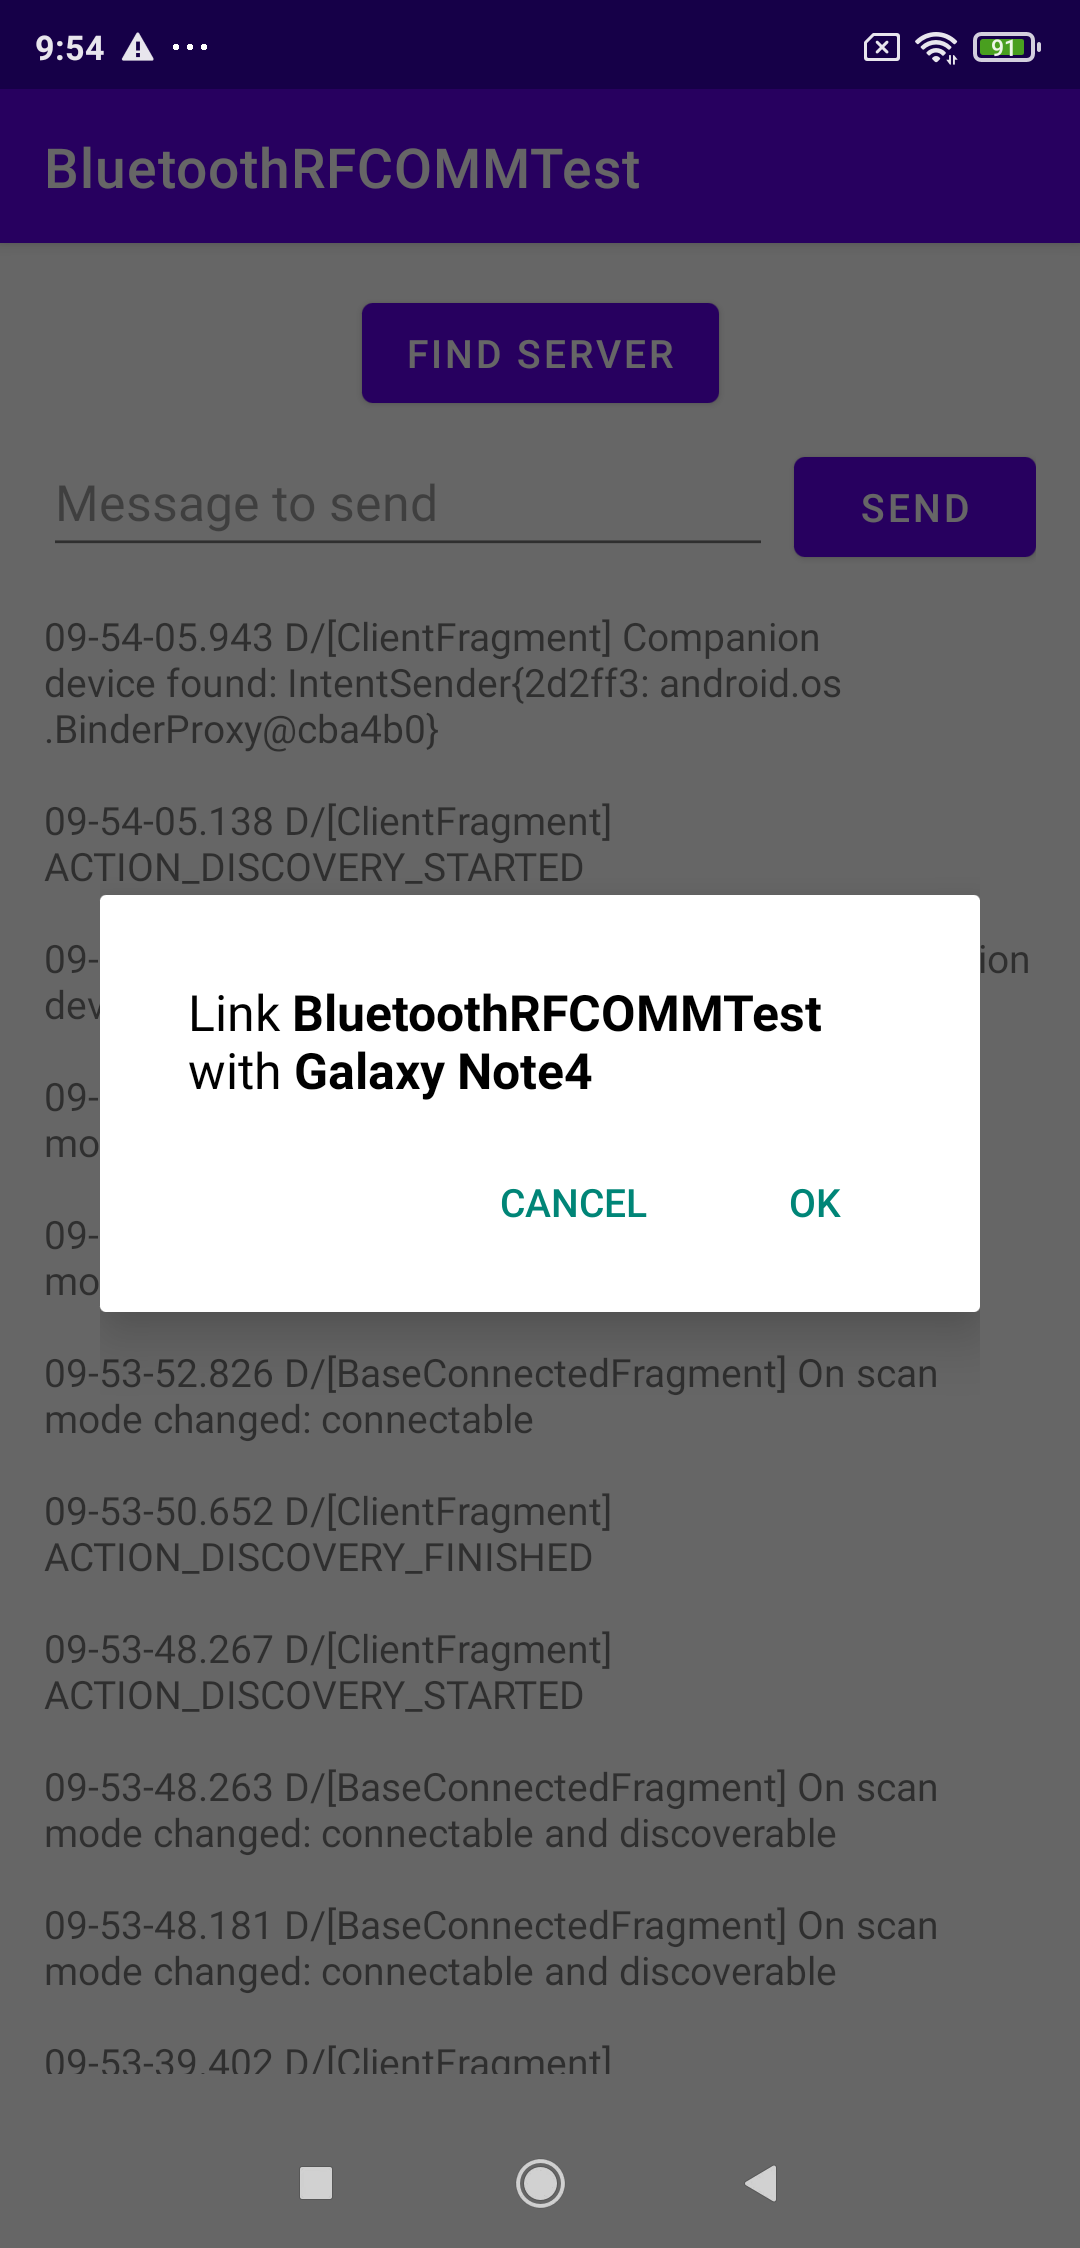 The comfirming dialog for linking with a companion device